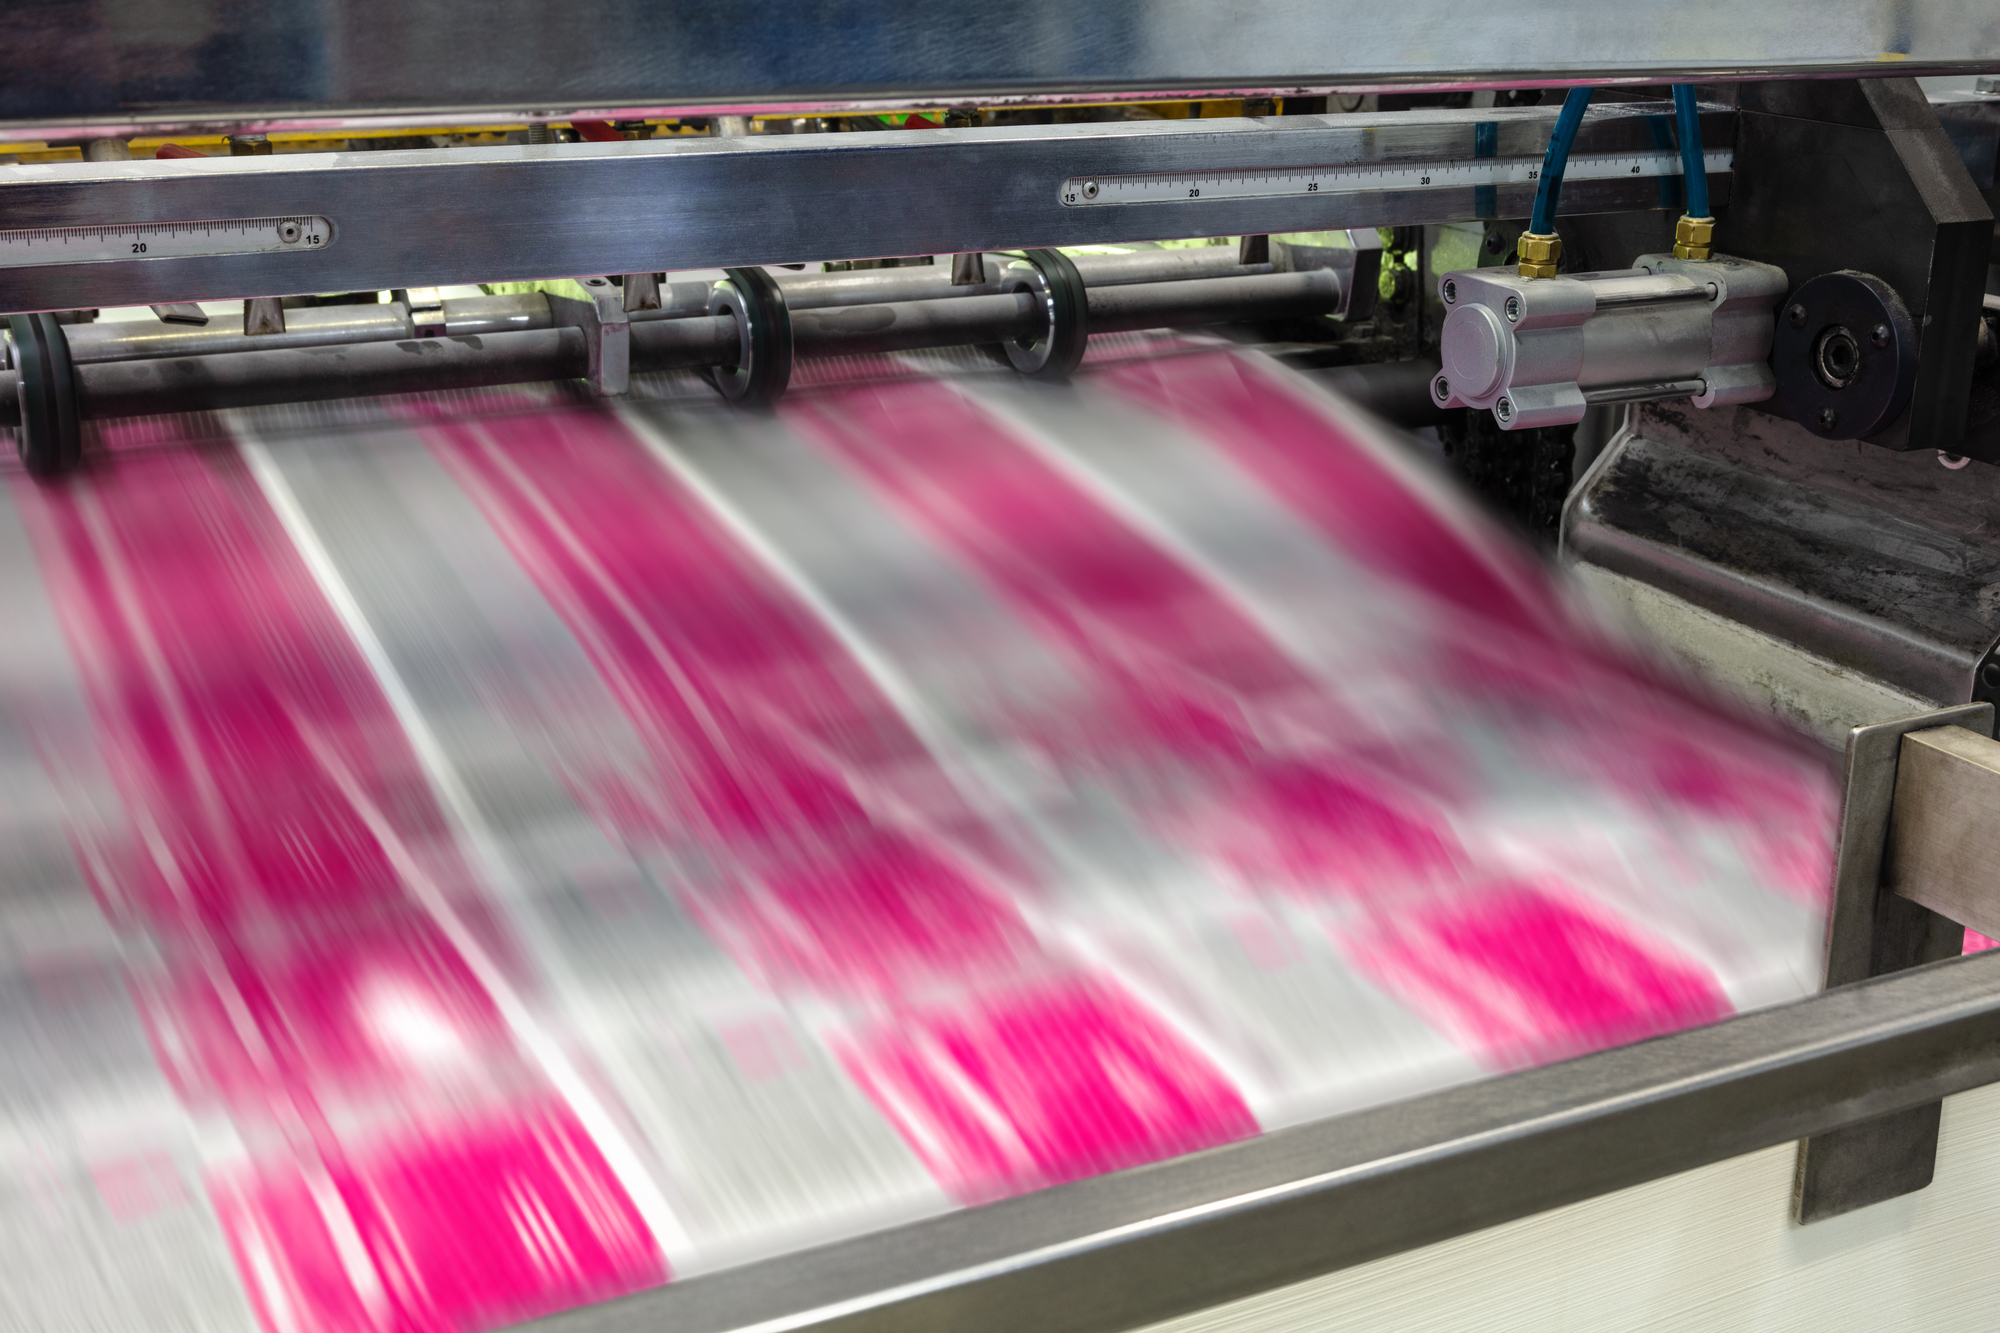 The Euphoric Colors printing workshop, equipped with cutting-edge machinery for fabric printing